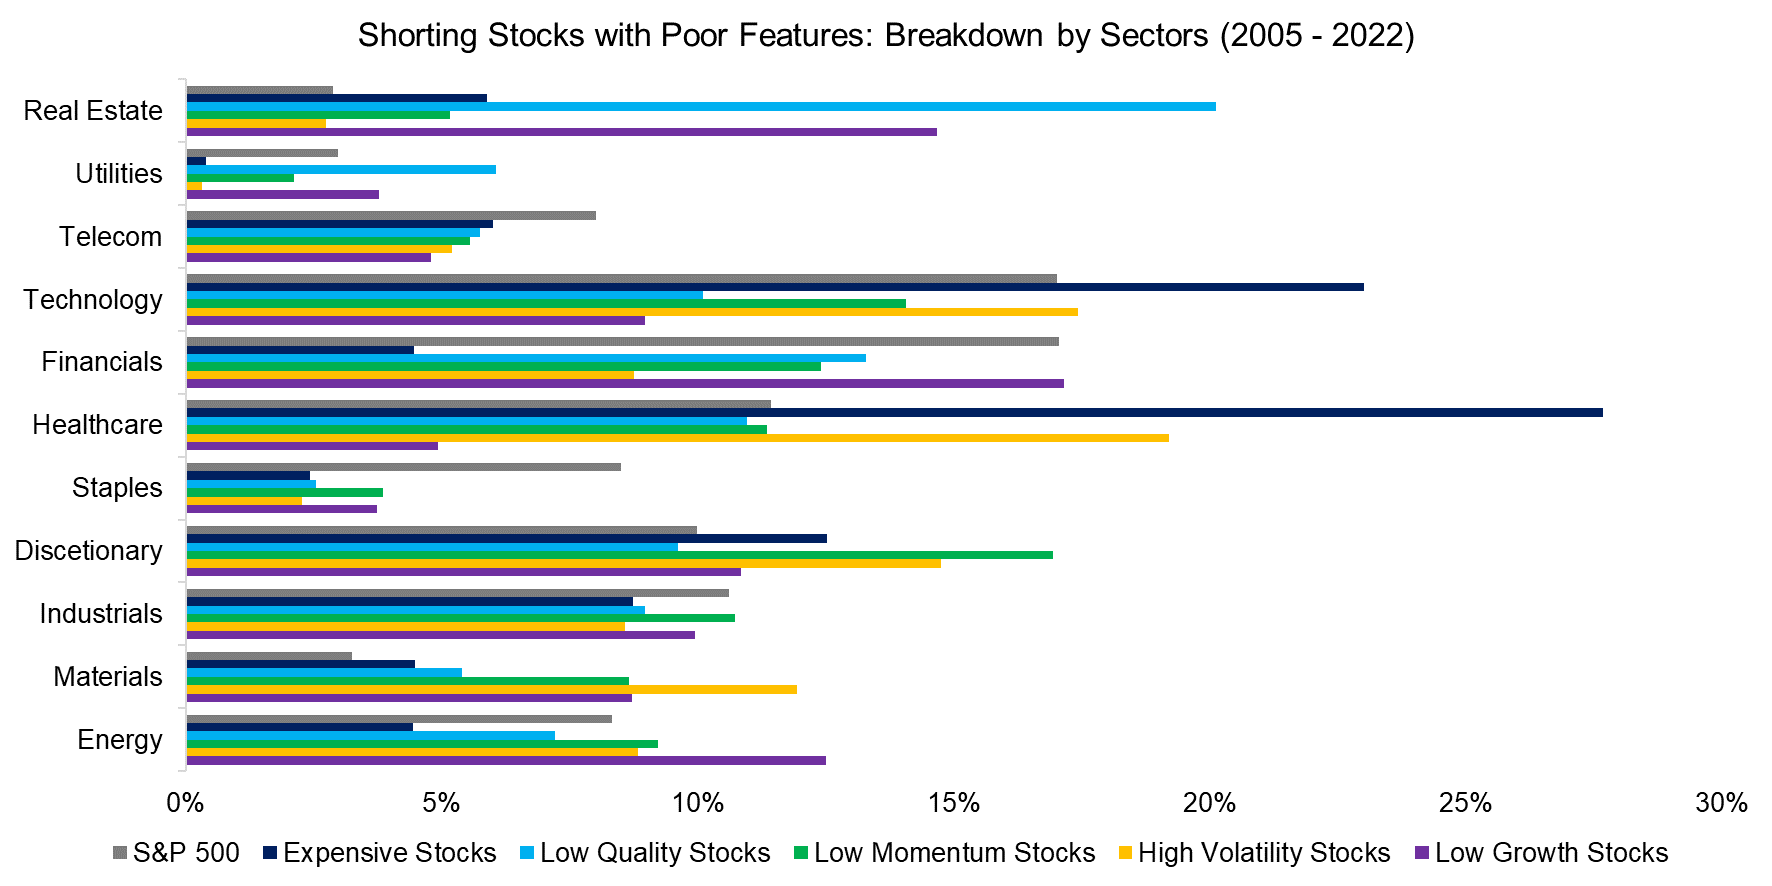 Shorting Stocks with Poor Features Breakdown by Sectors (2005 - 2022)